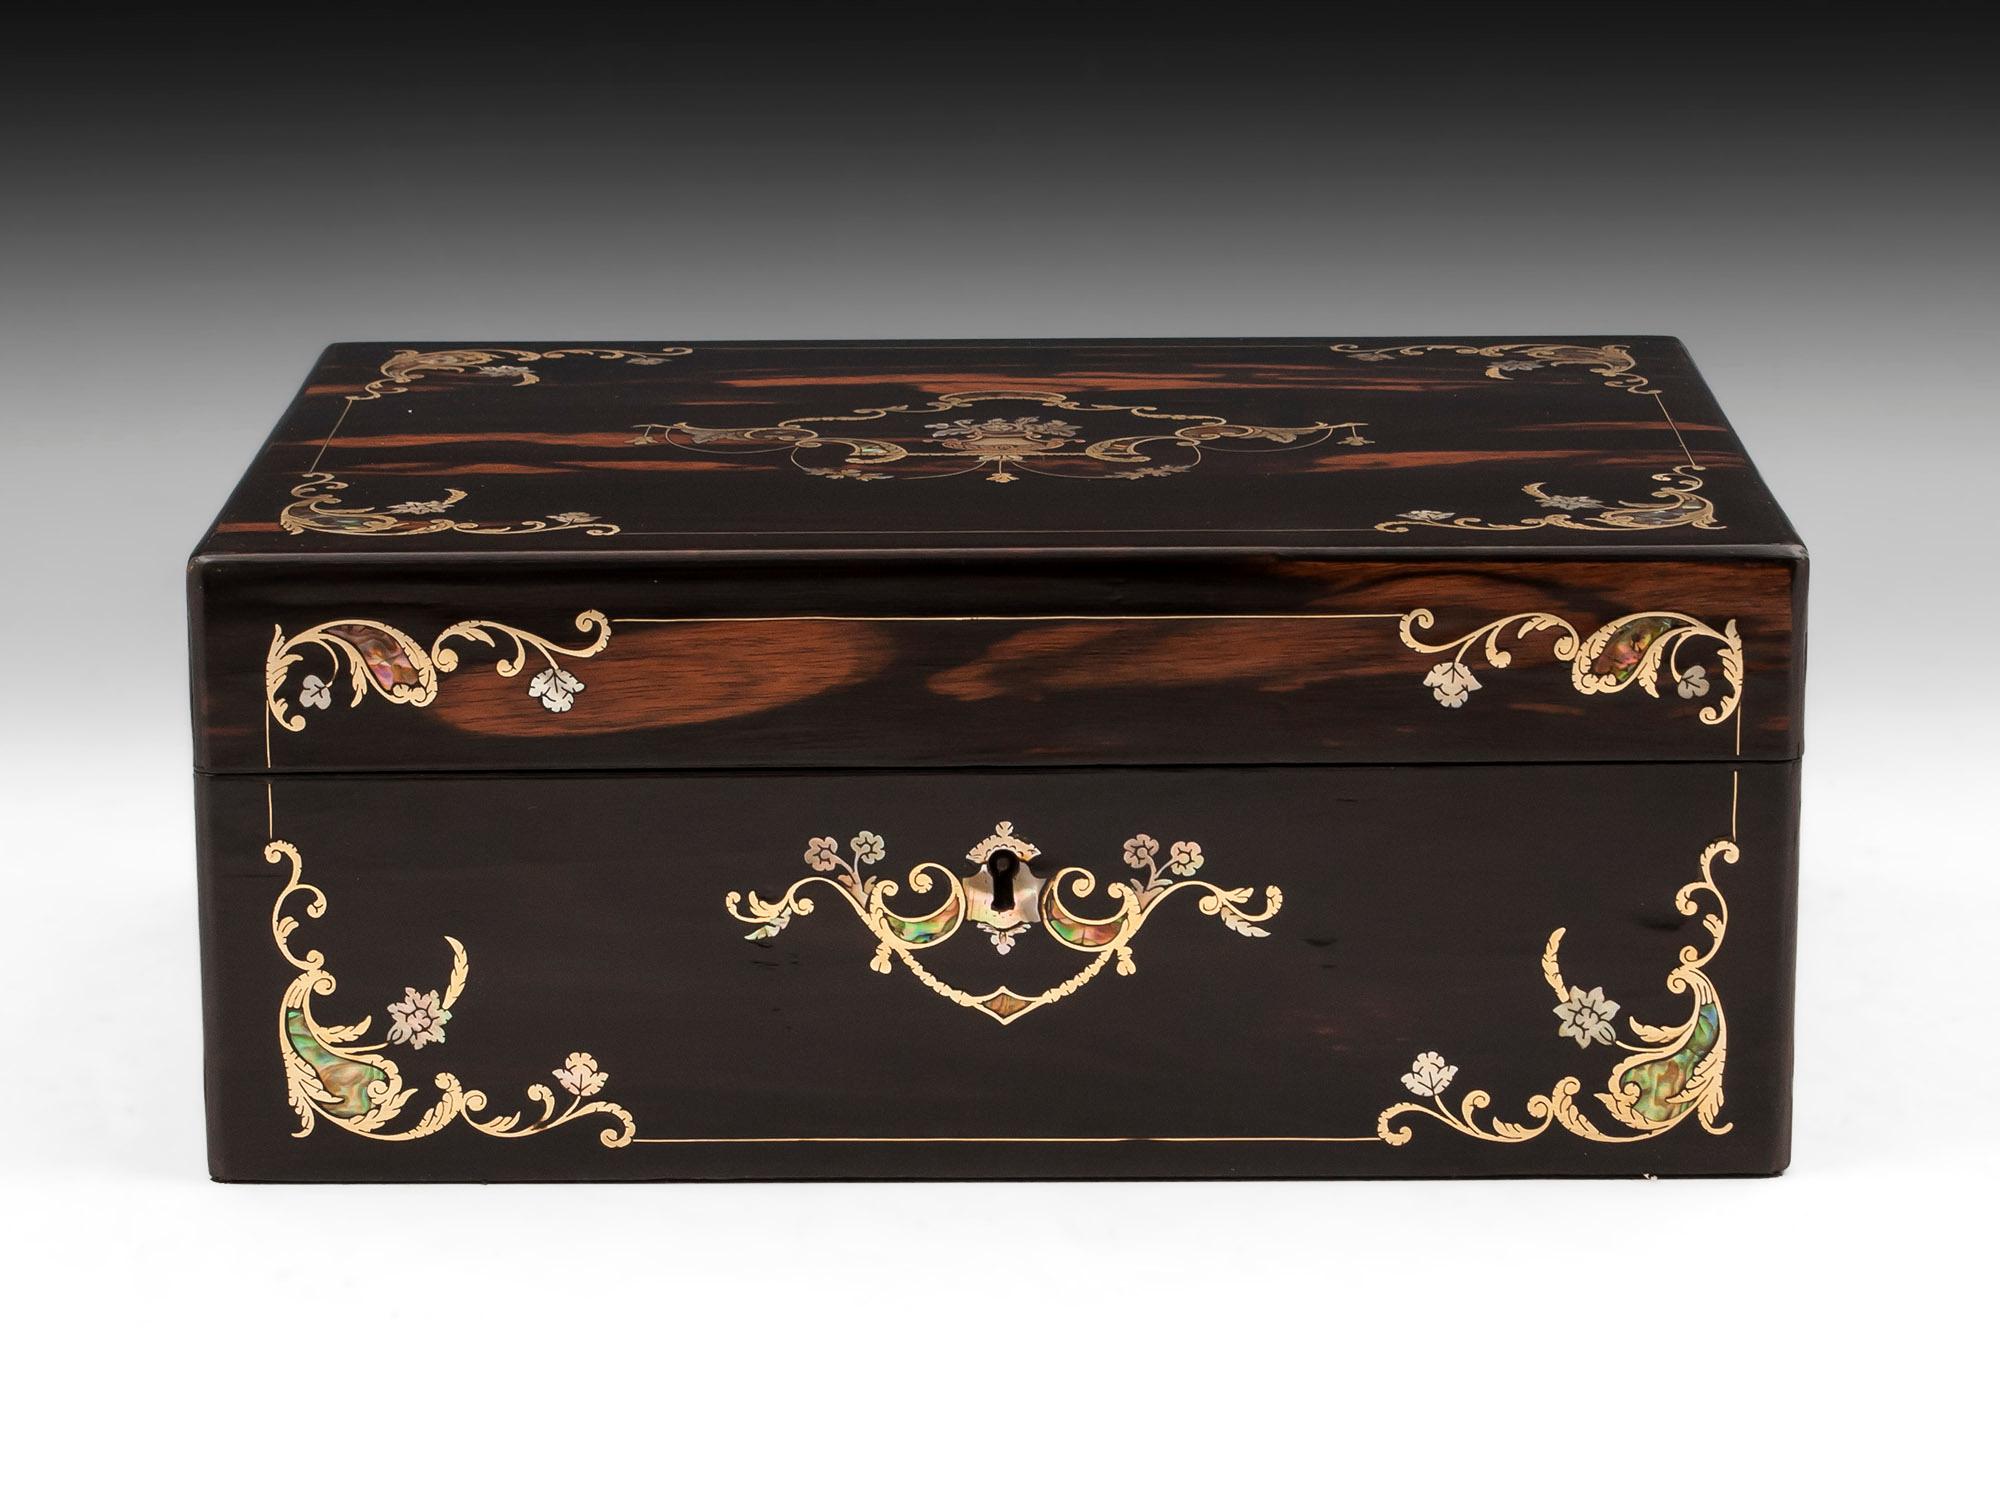 Coromandel jewelry box with intricate mother of pearl, abalone and brass wire floral inlays to the top and front. 

Opening this exquisite jewelry box lid reveals a teal padded velvet and white silk paper lined interior removable tray, featuring a